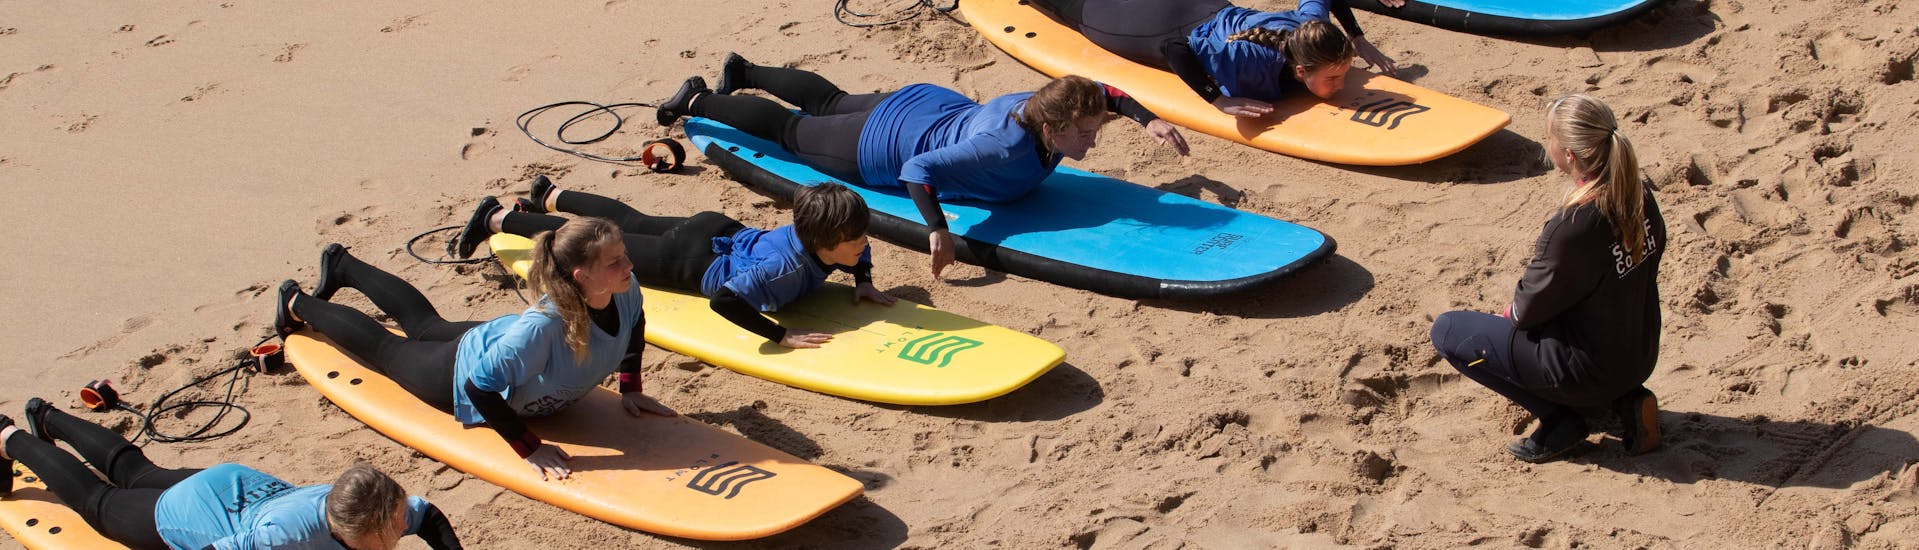 A group of people learns how to paddle during a surf lesson in Ericeira on Praia do Matadouro with Boardculture Surf Center.